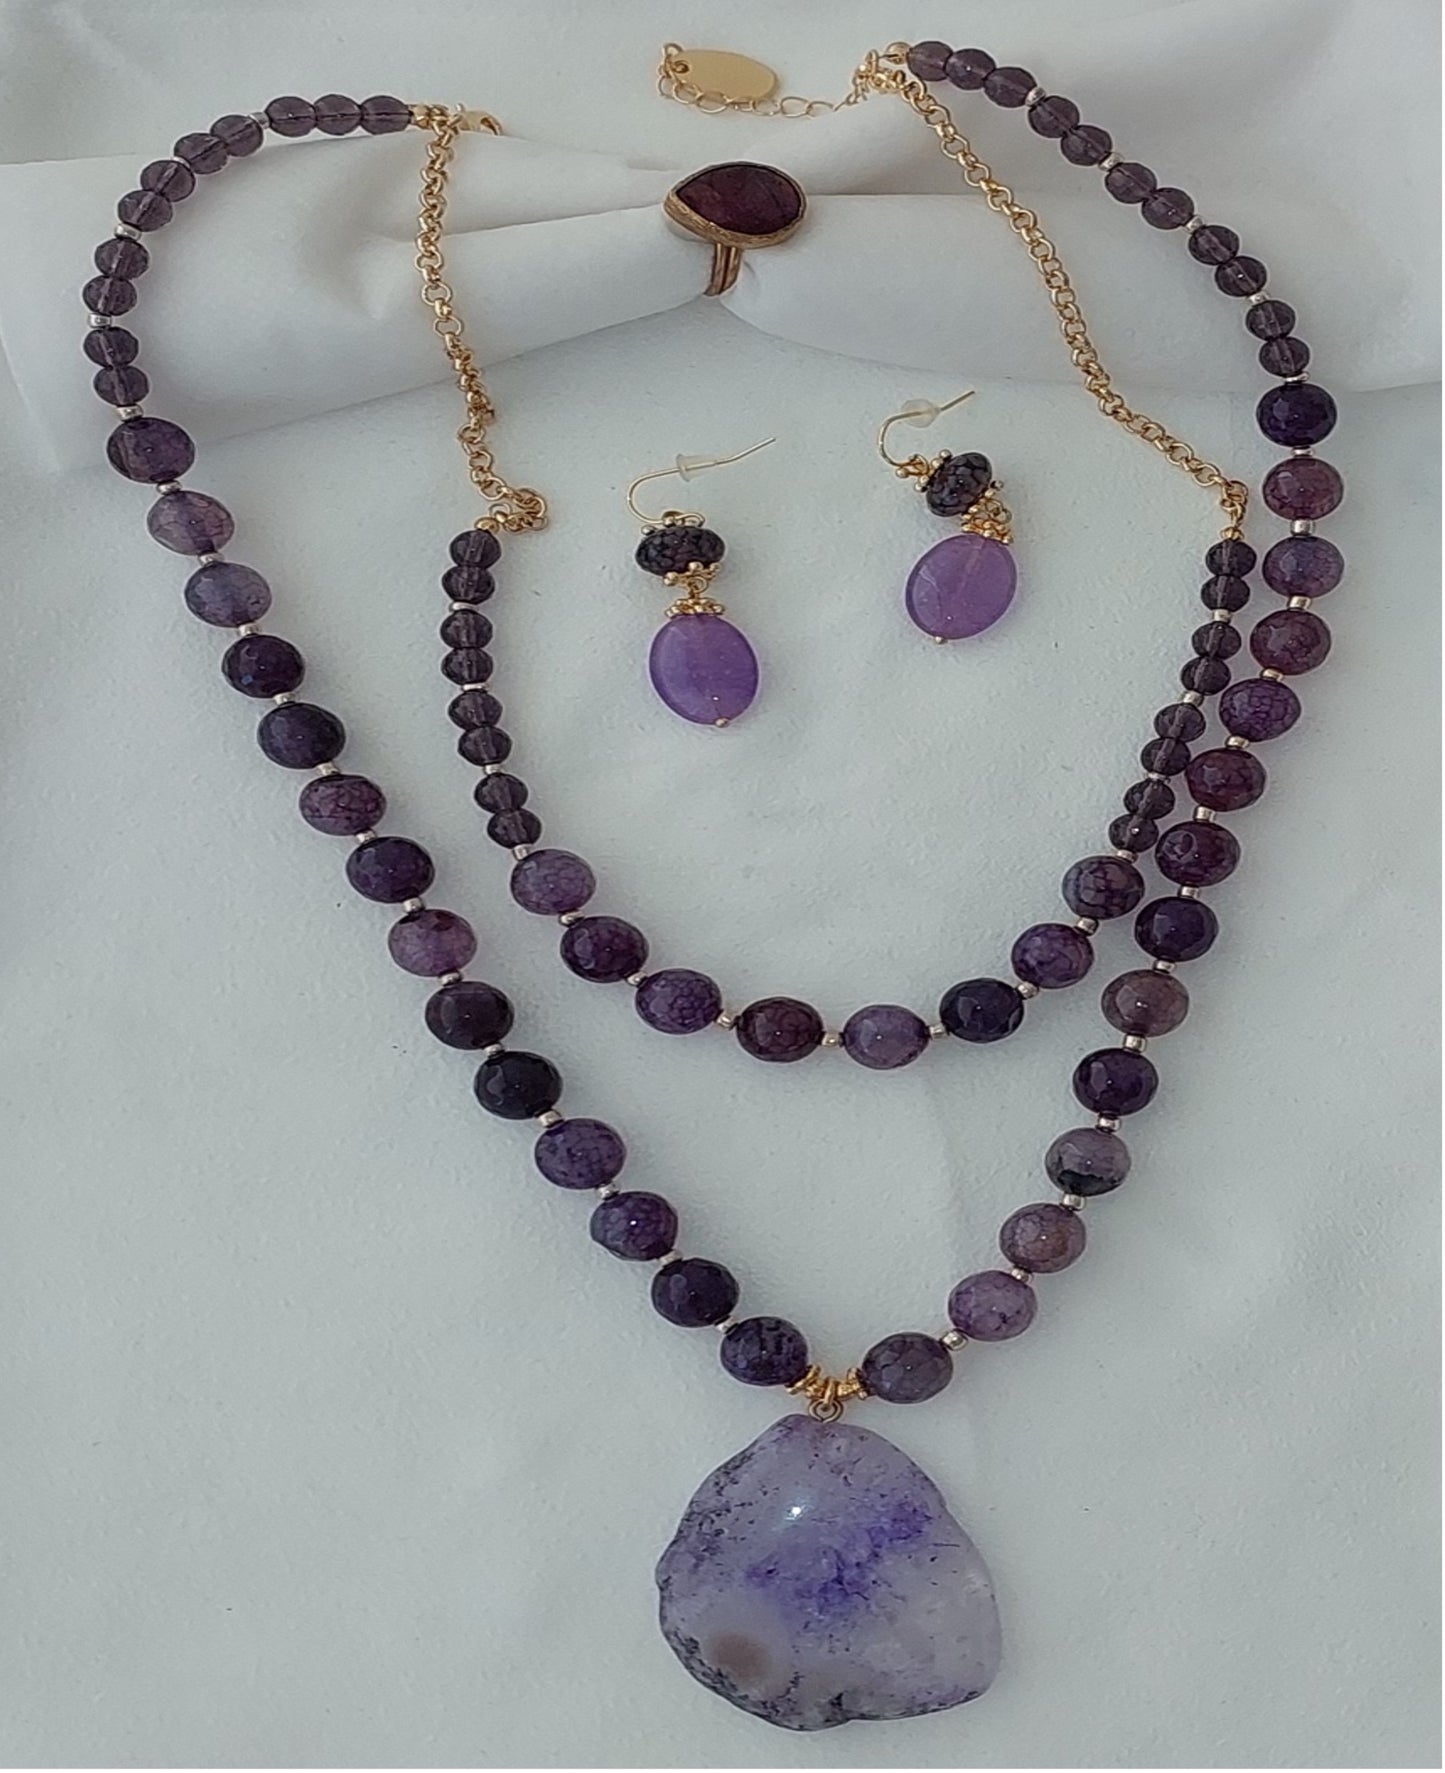 Jewelry Set Necklace Earrings Ring 3 pieces Handmade Gemstones Purple Chariote Amethyst Great Gift for Woman